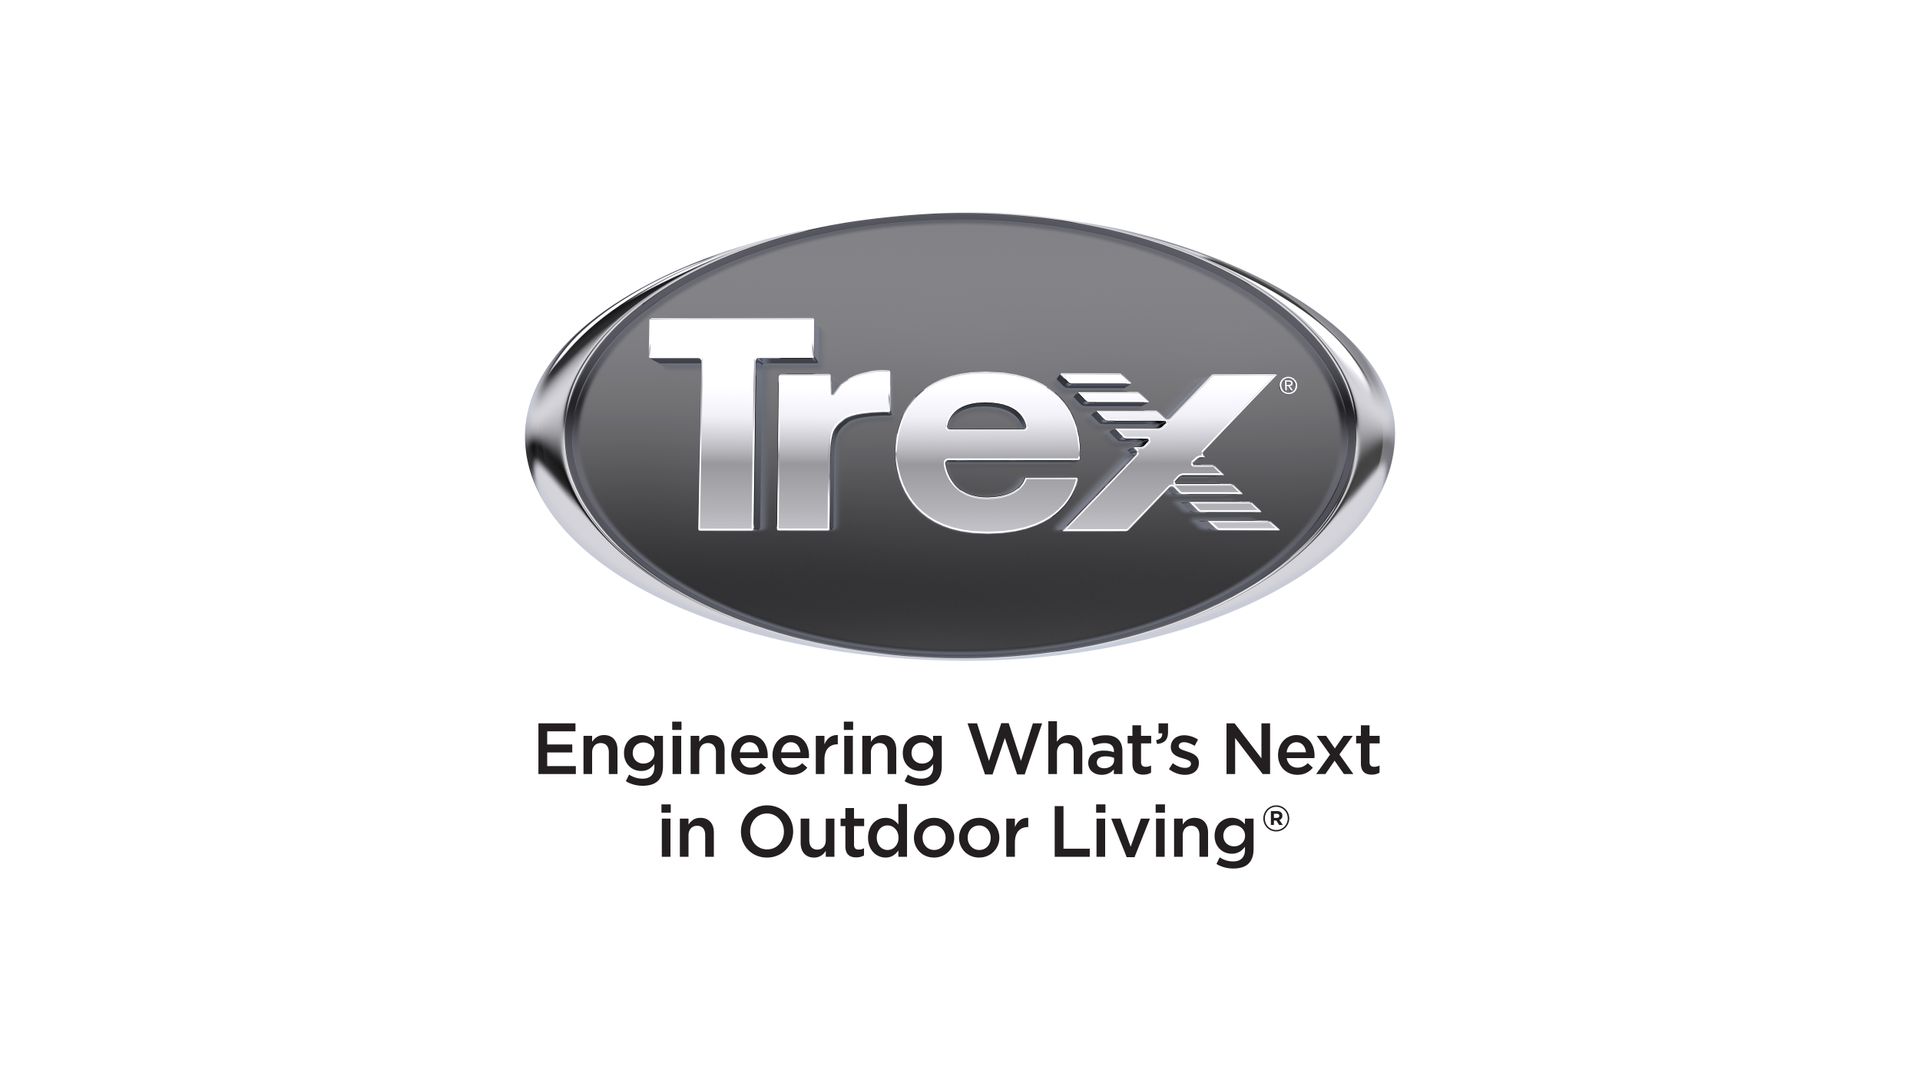 TREX Engineering What's Next in Outdoor Living. Build With Character